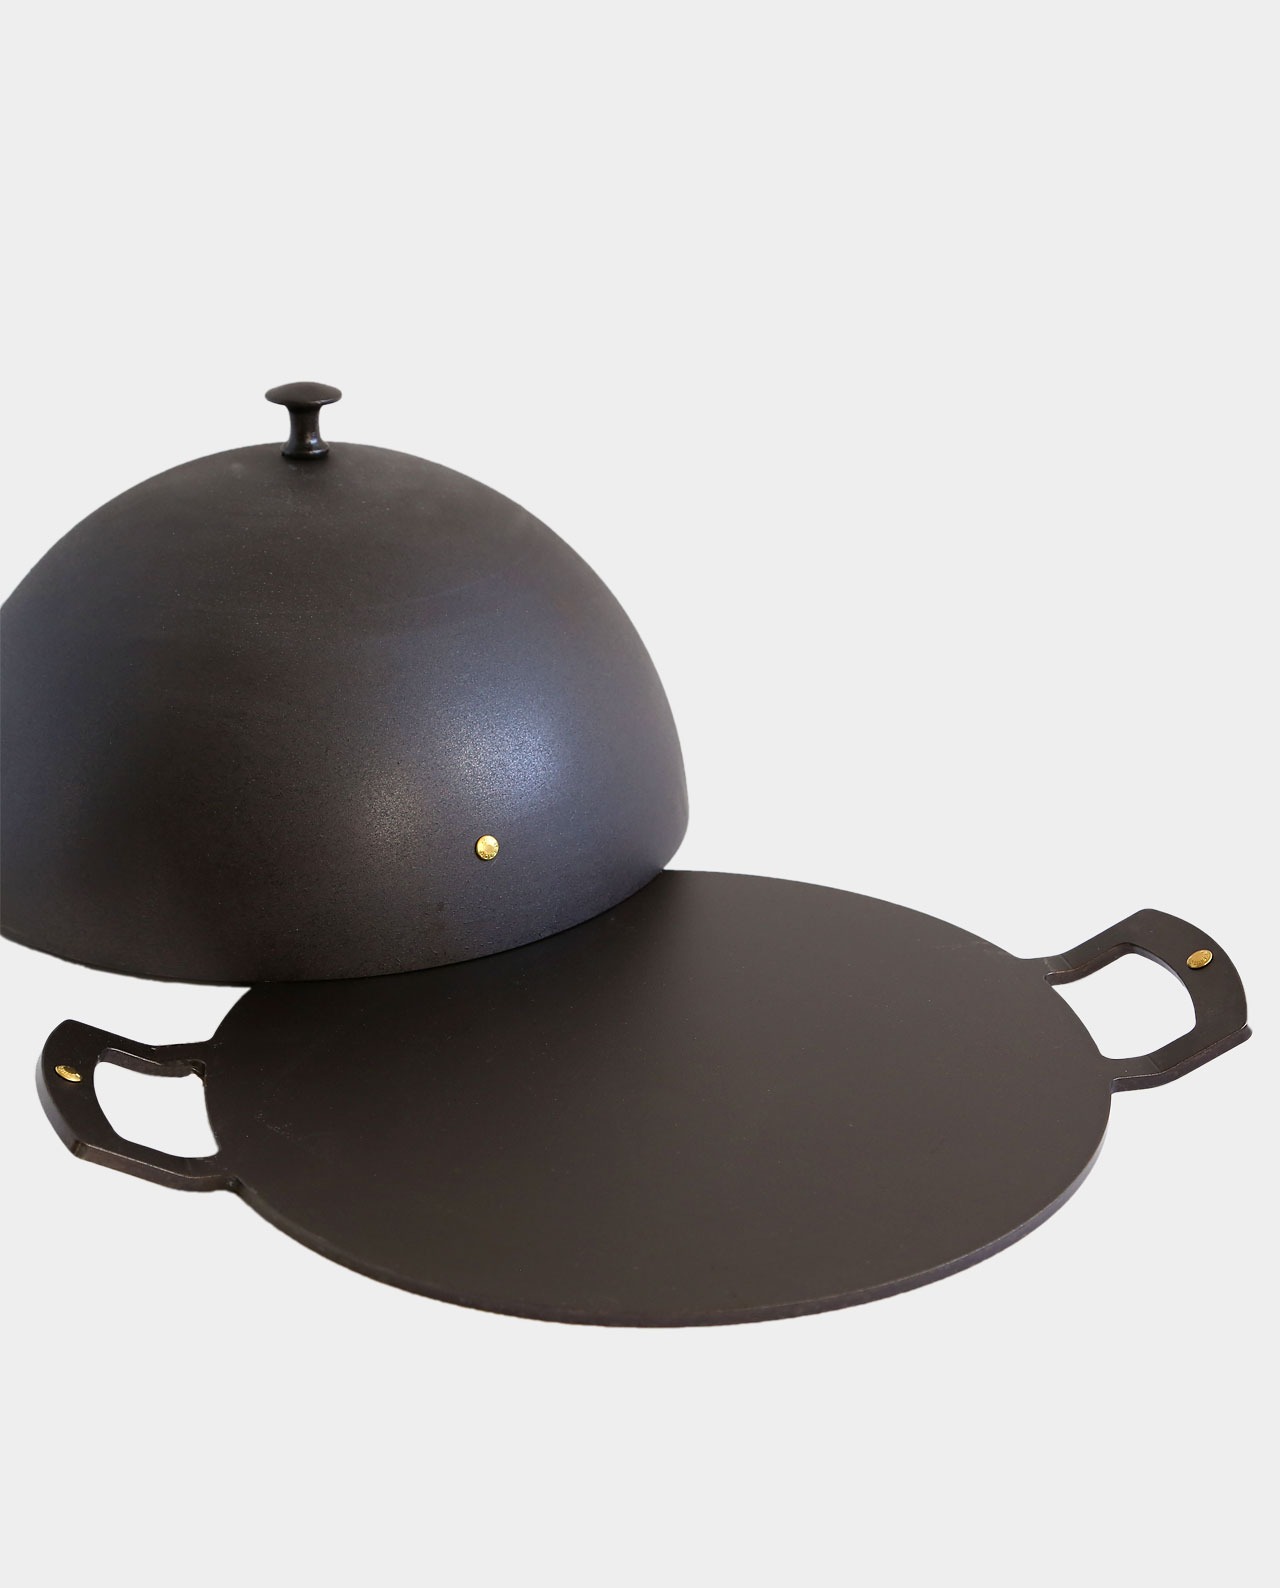 Netherton Foundry Spun Iron Baking Cloche with Griddle and Baking